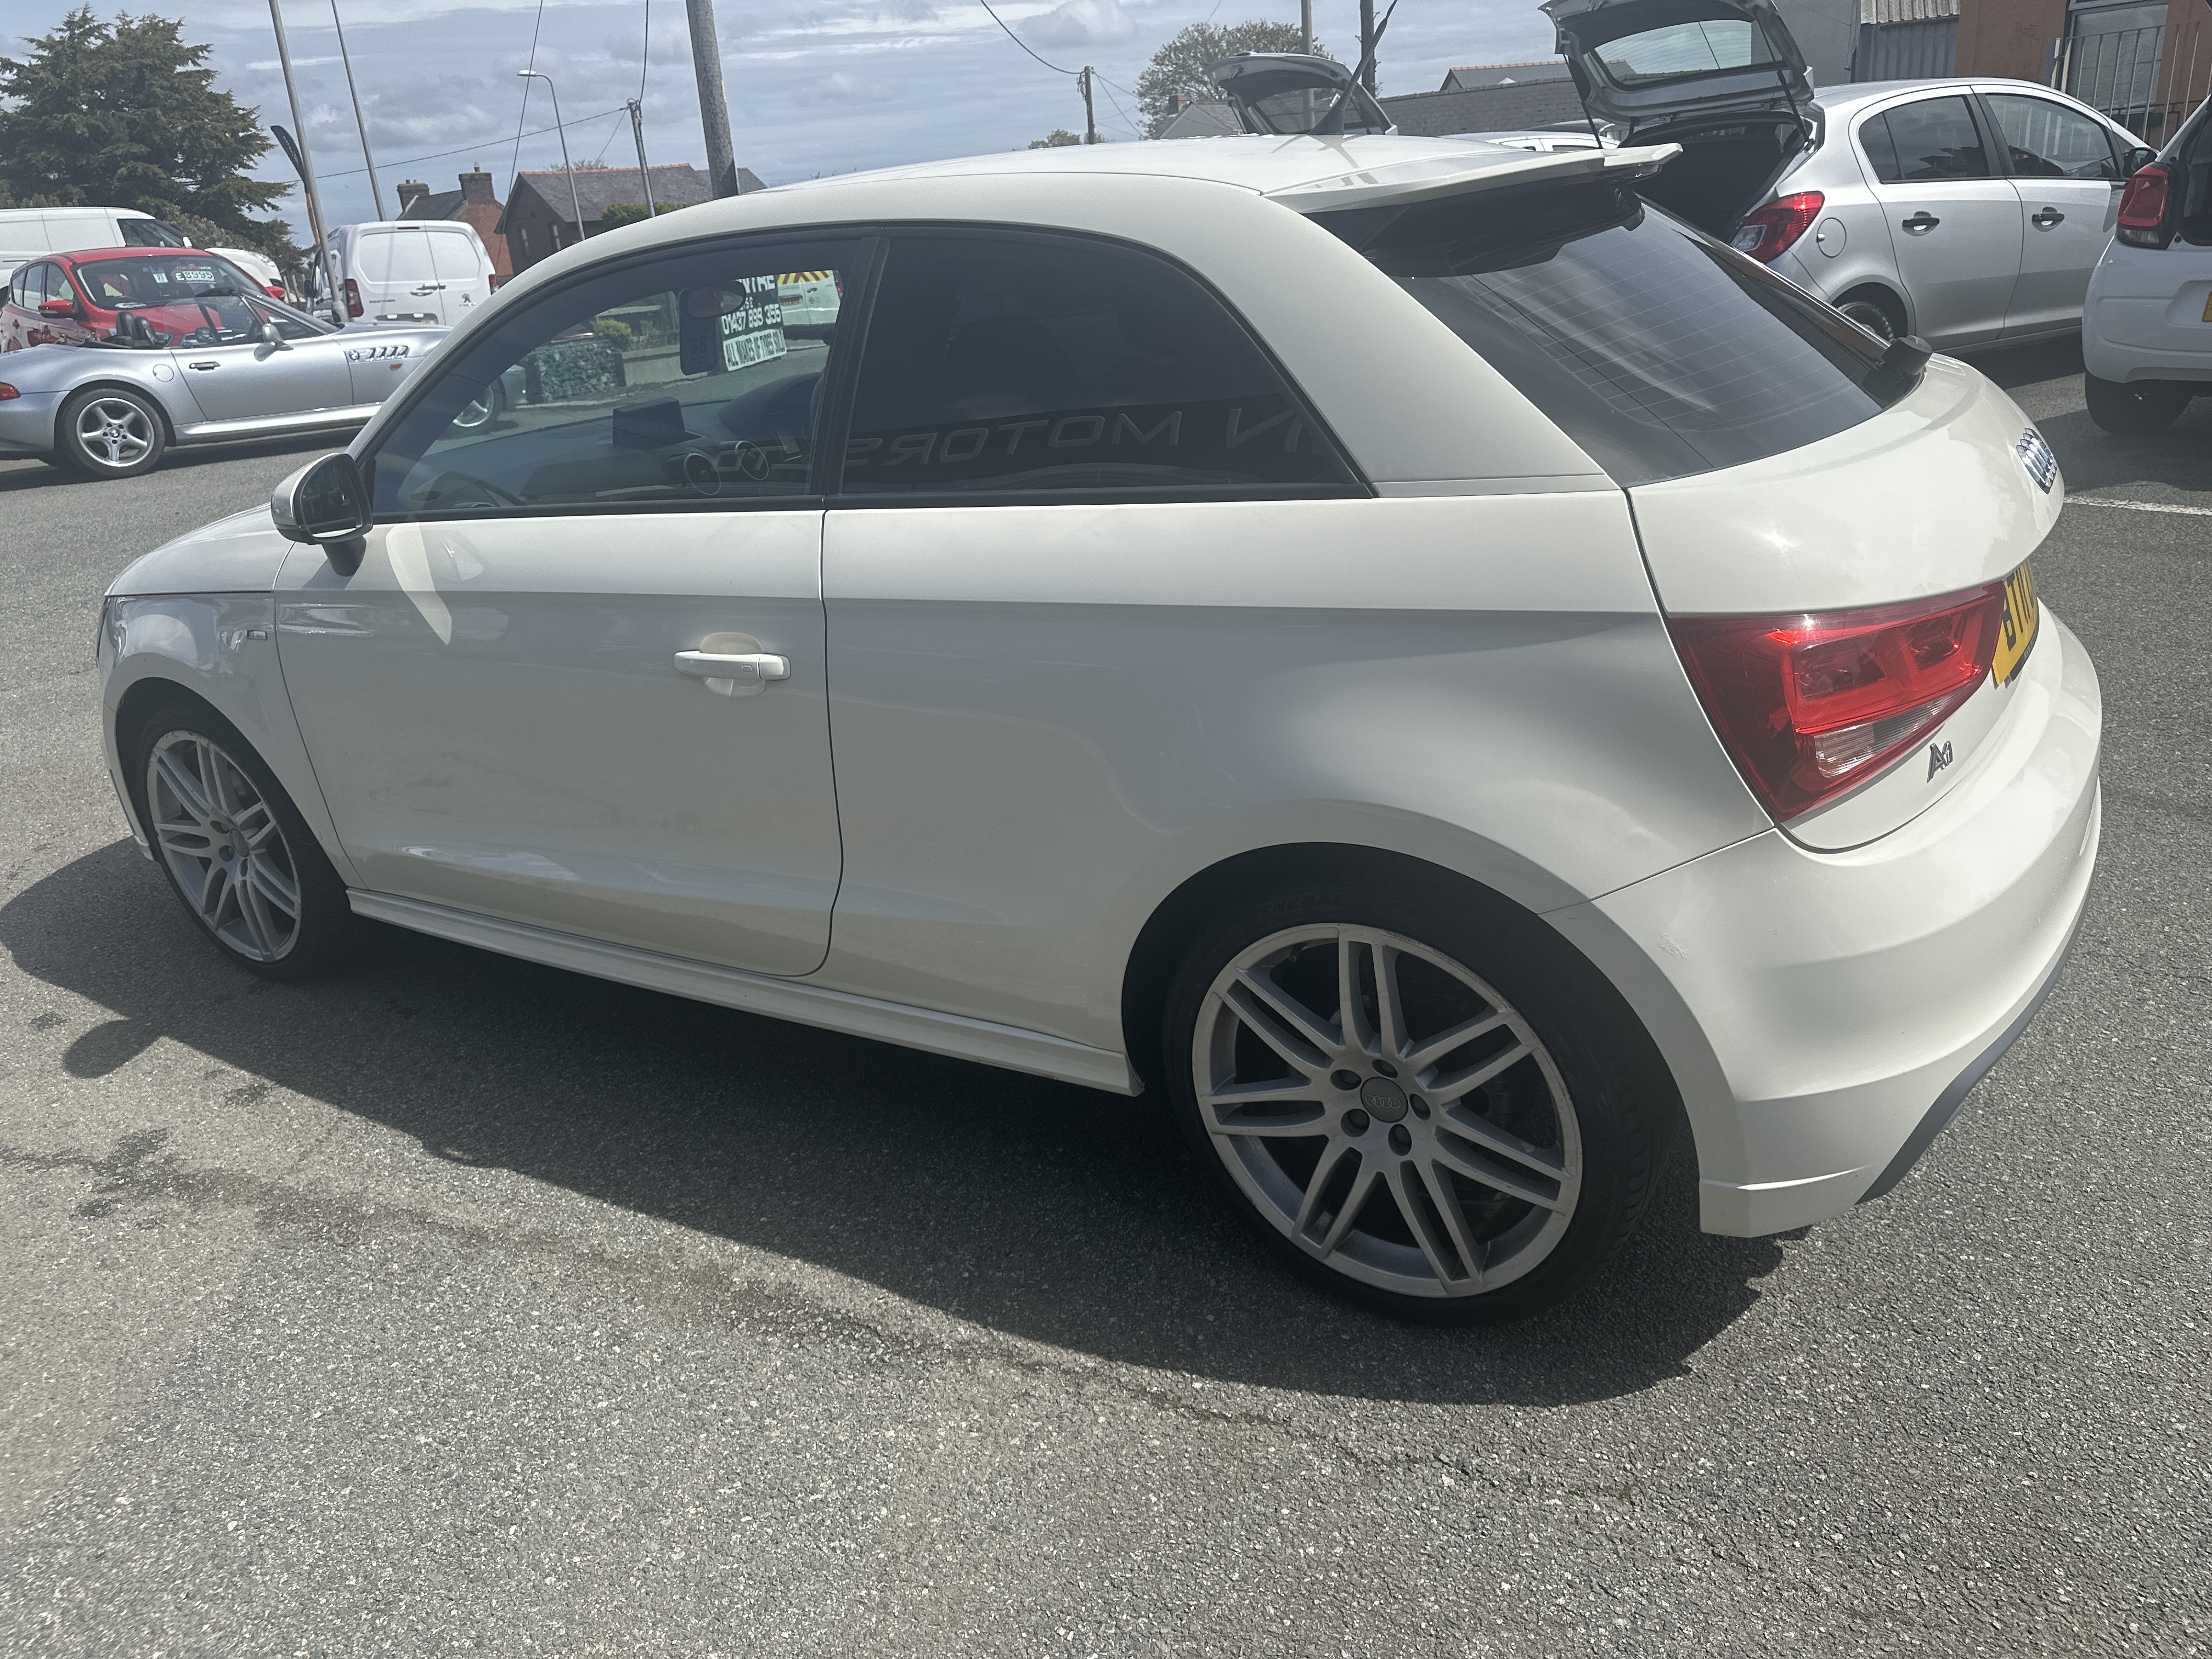 Audi A1 S LINE TDI (TURBO DIESEL)  for sale at Mike Howlin Motor Sales Pembrokeshire